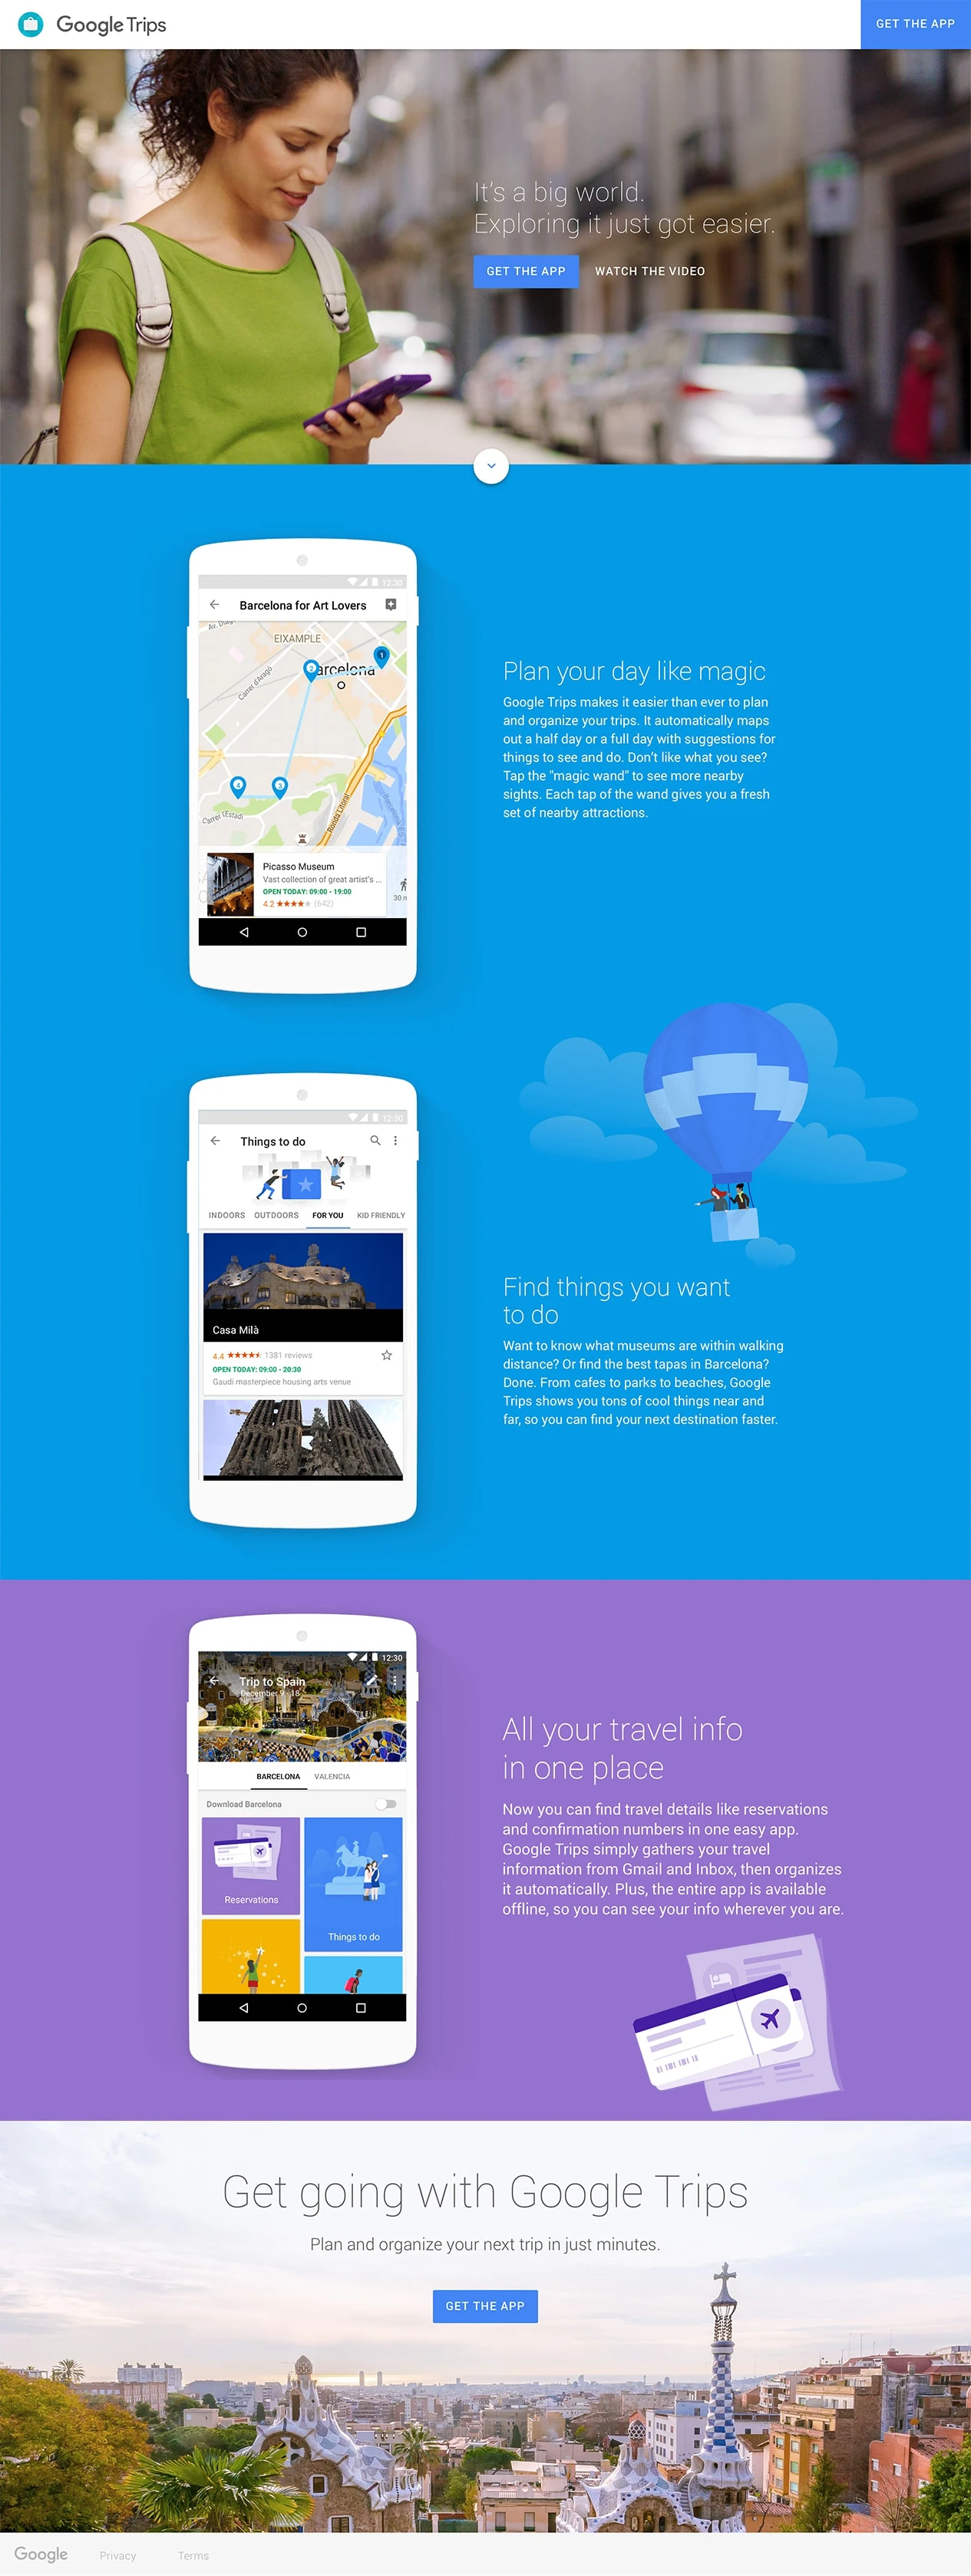 Google Trips Landing Page Example: Google Trips makes it easier than ever to plan and organize your trips. It automatically maps out a half day or a full day with suggestions for things to see and do. 